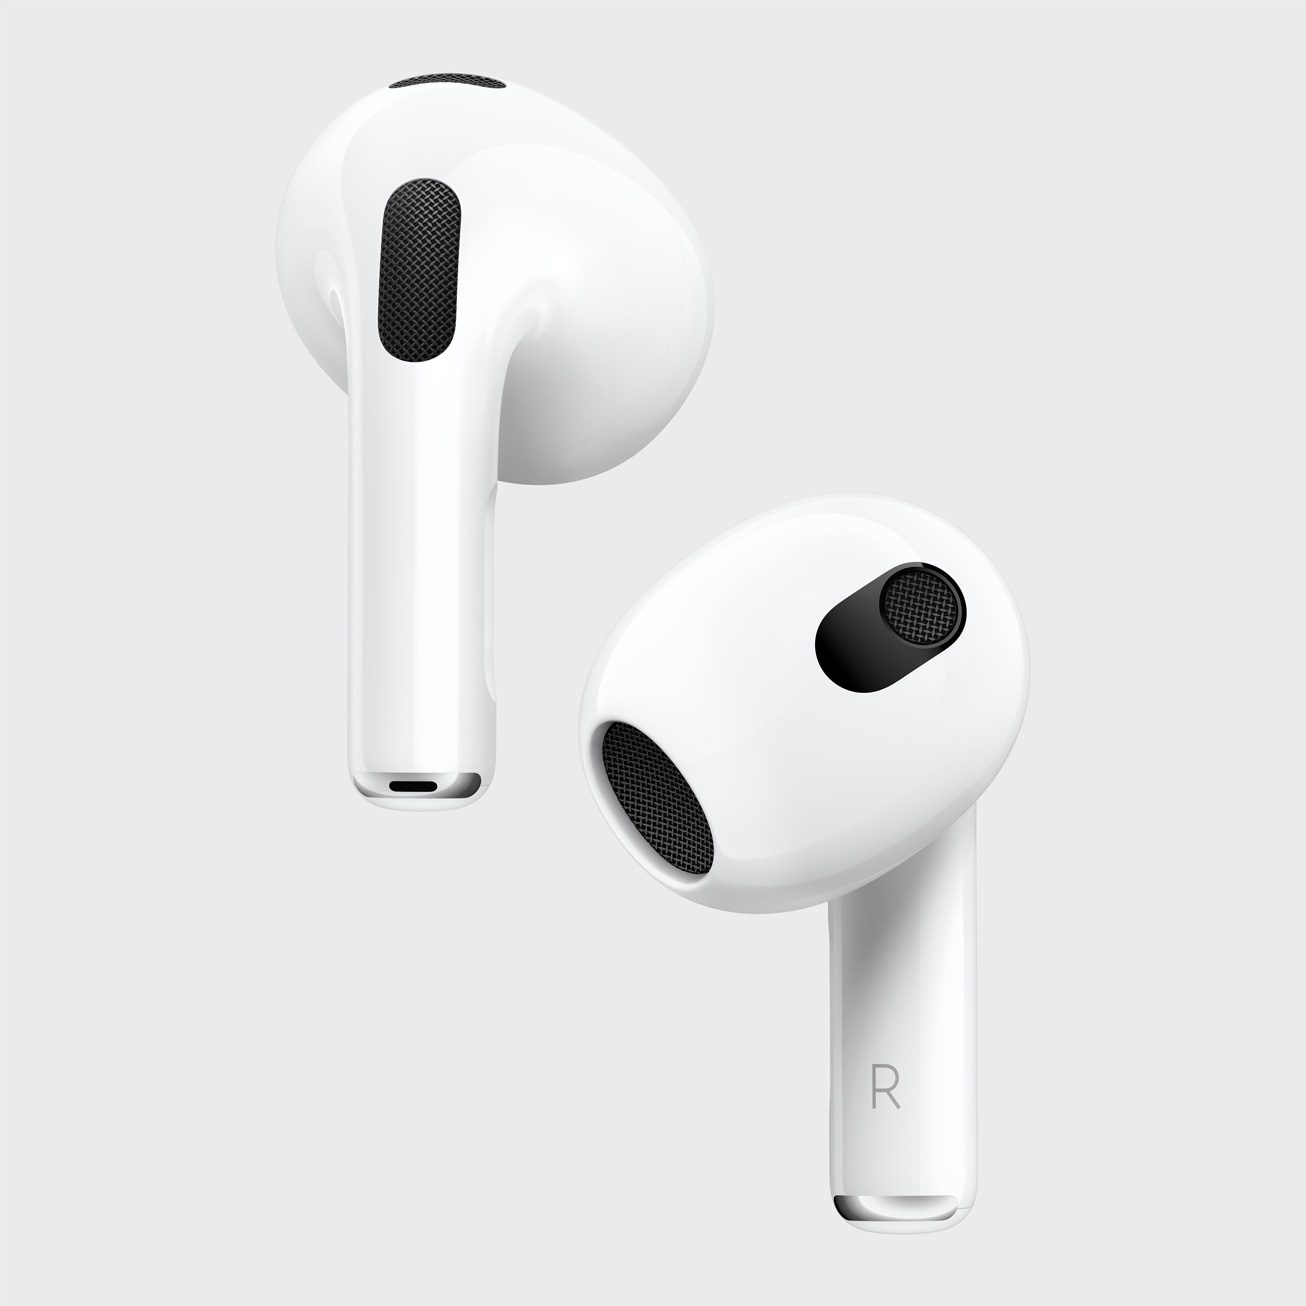 3rd generation AirPods